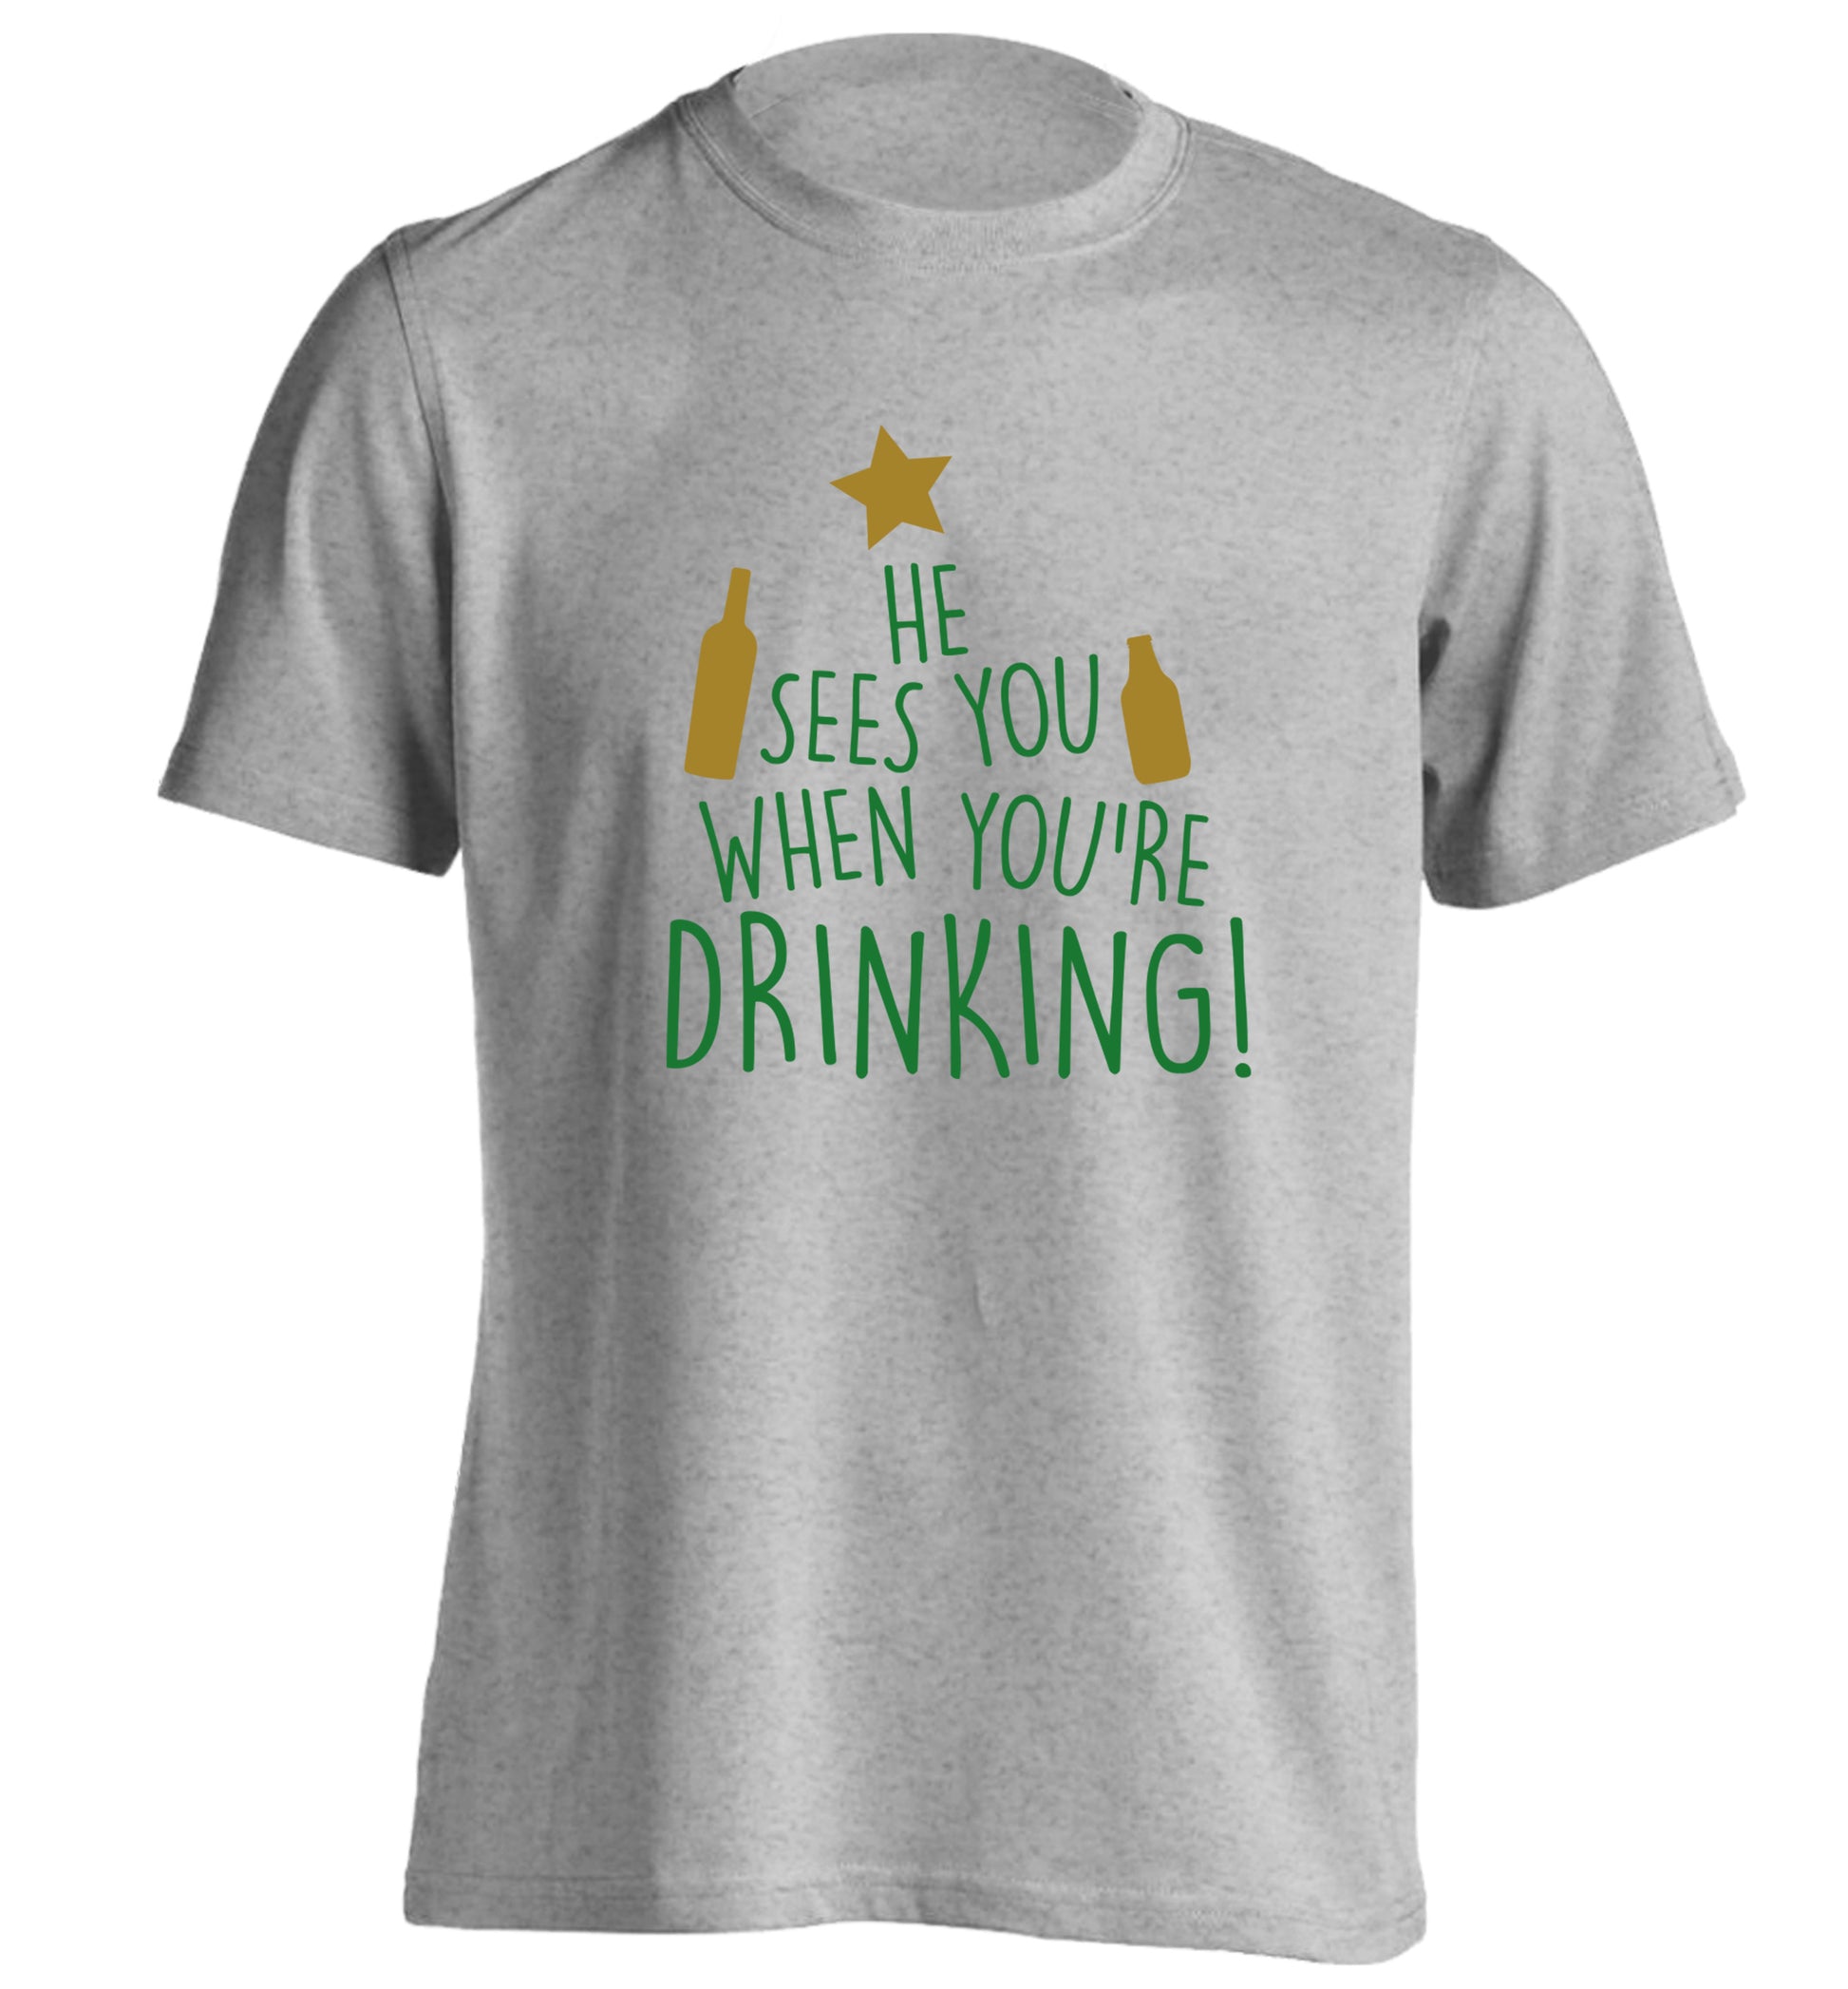 He sees you when you're drinking adults unisex grey Tshirt 2XL